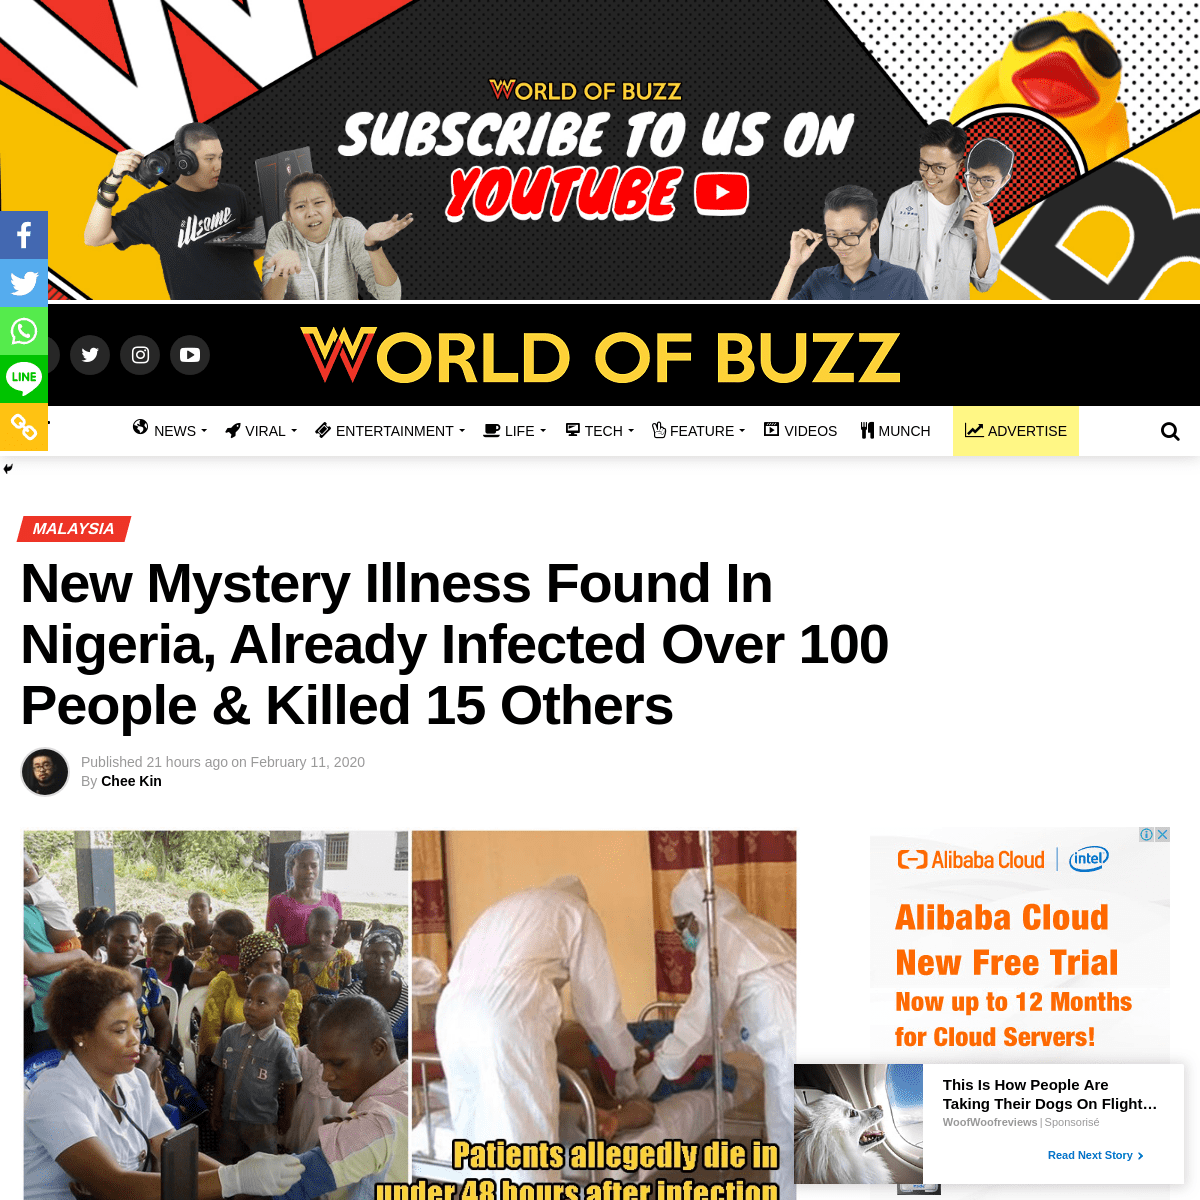 A complete backup of www.worldofbuzz.com/new-mystery-illness-found-in-nigeria-already-infected-over-100-people-killed-15-others/